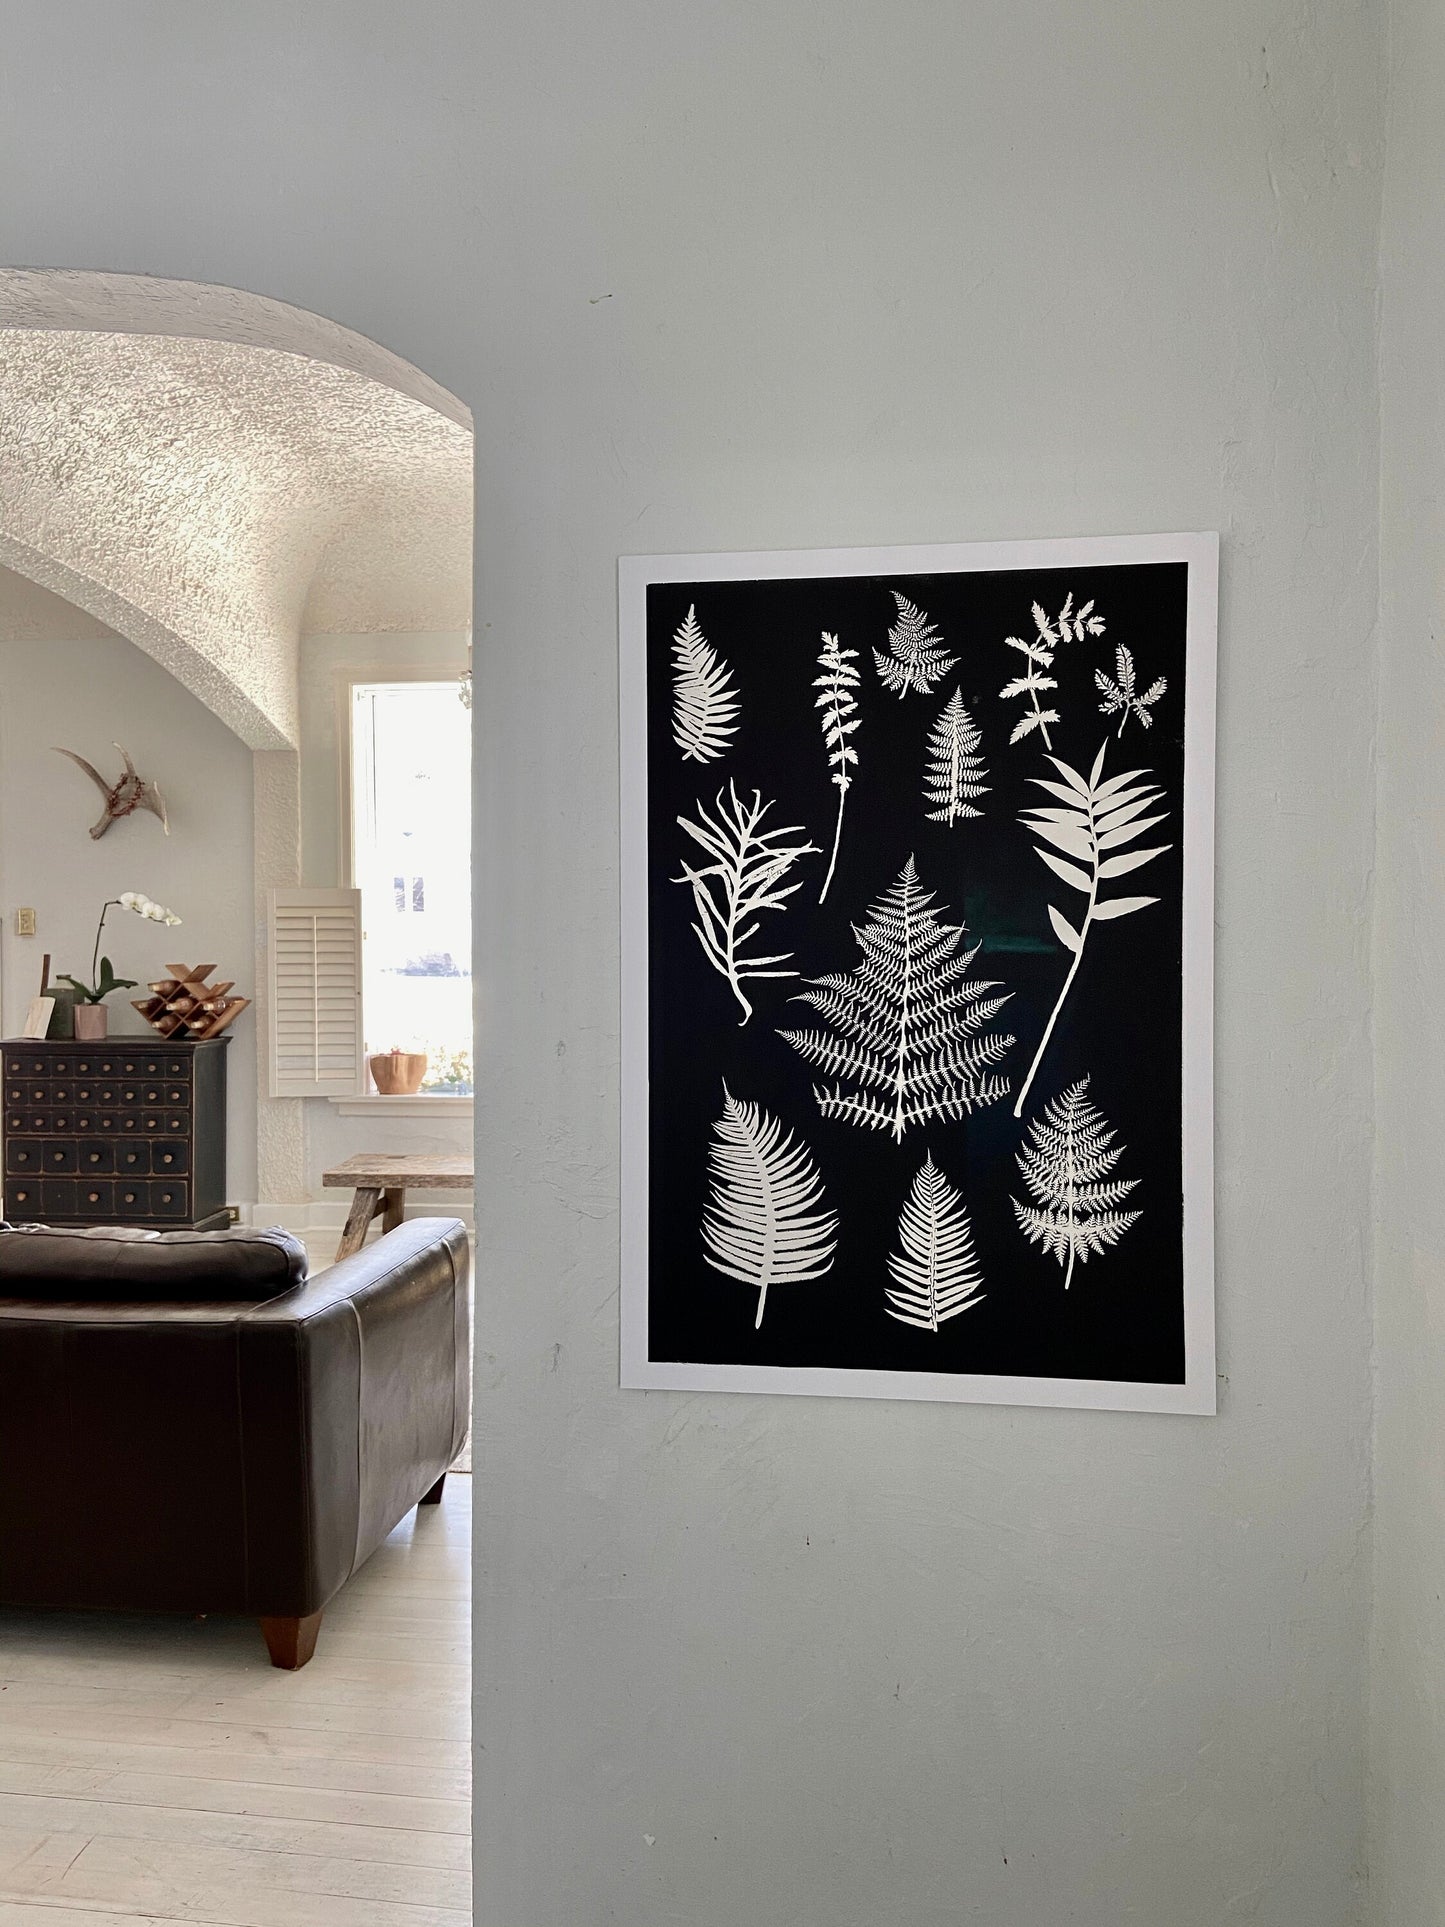 Ferns and Leaves Collage I Monoprint - 24x36 giclee print